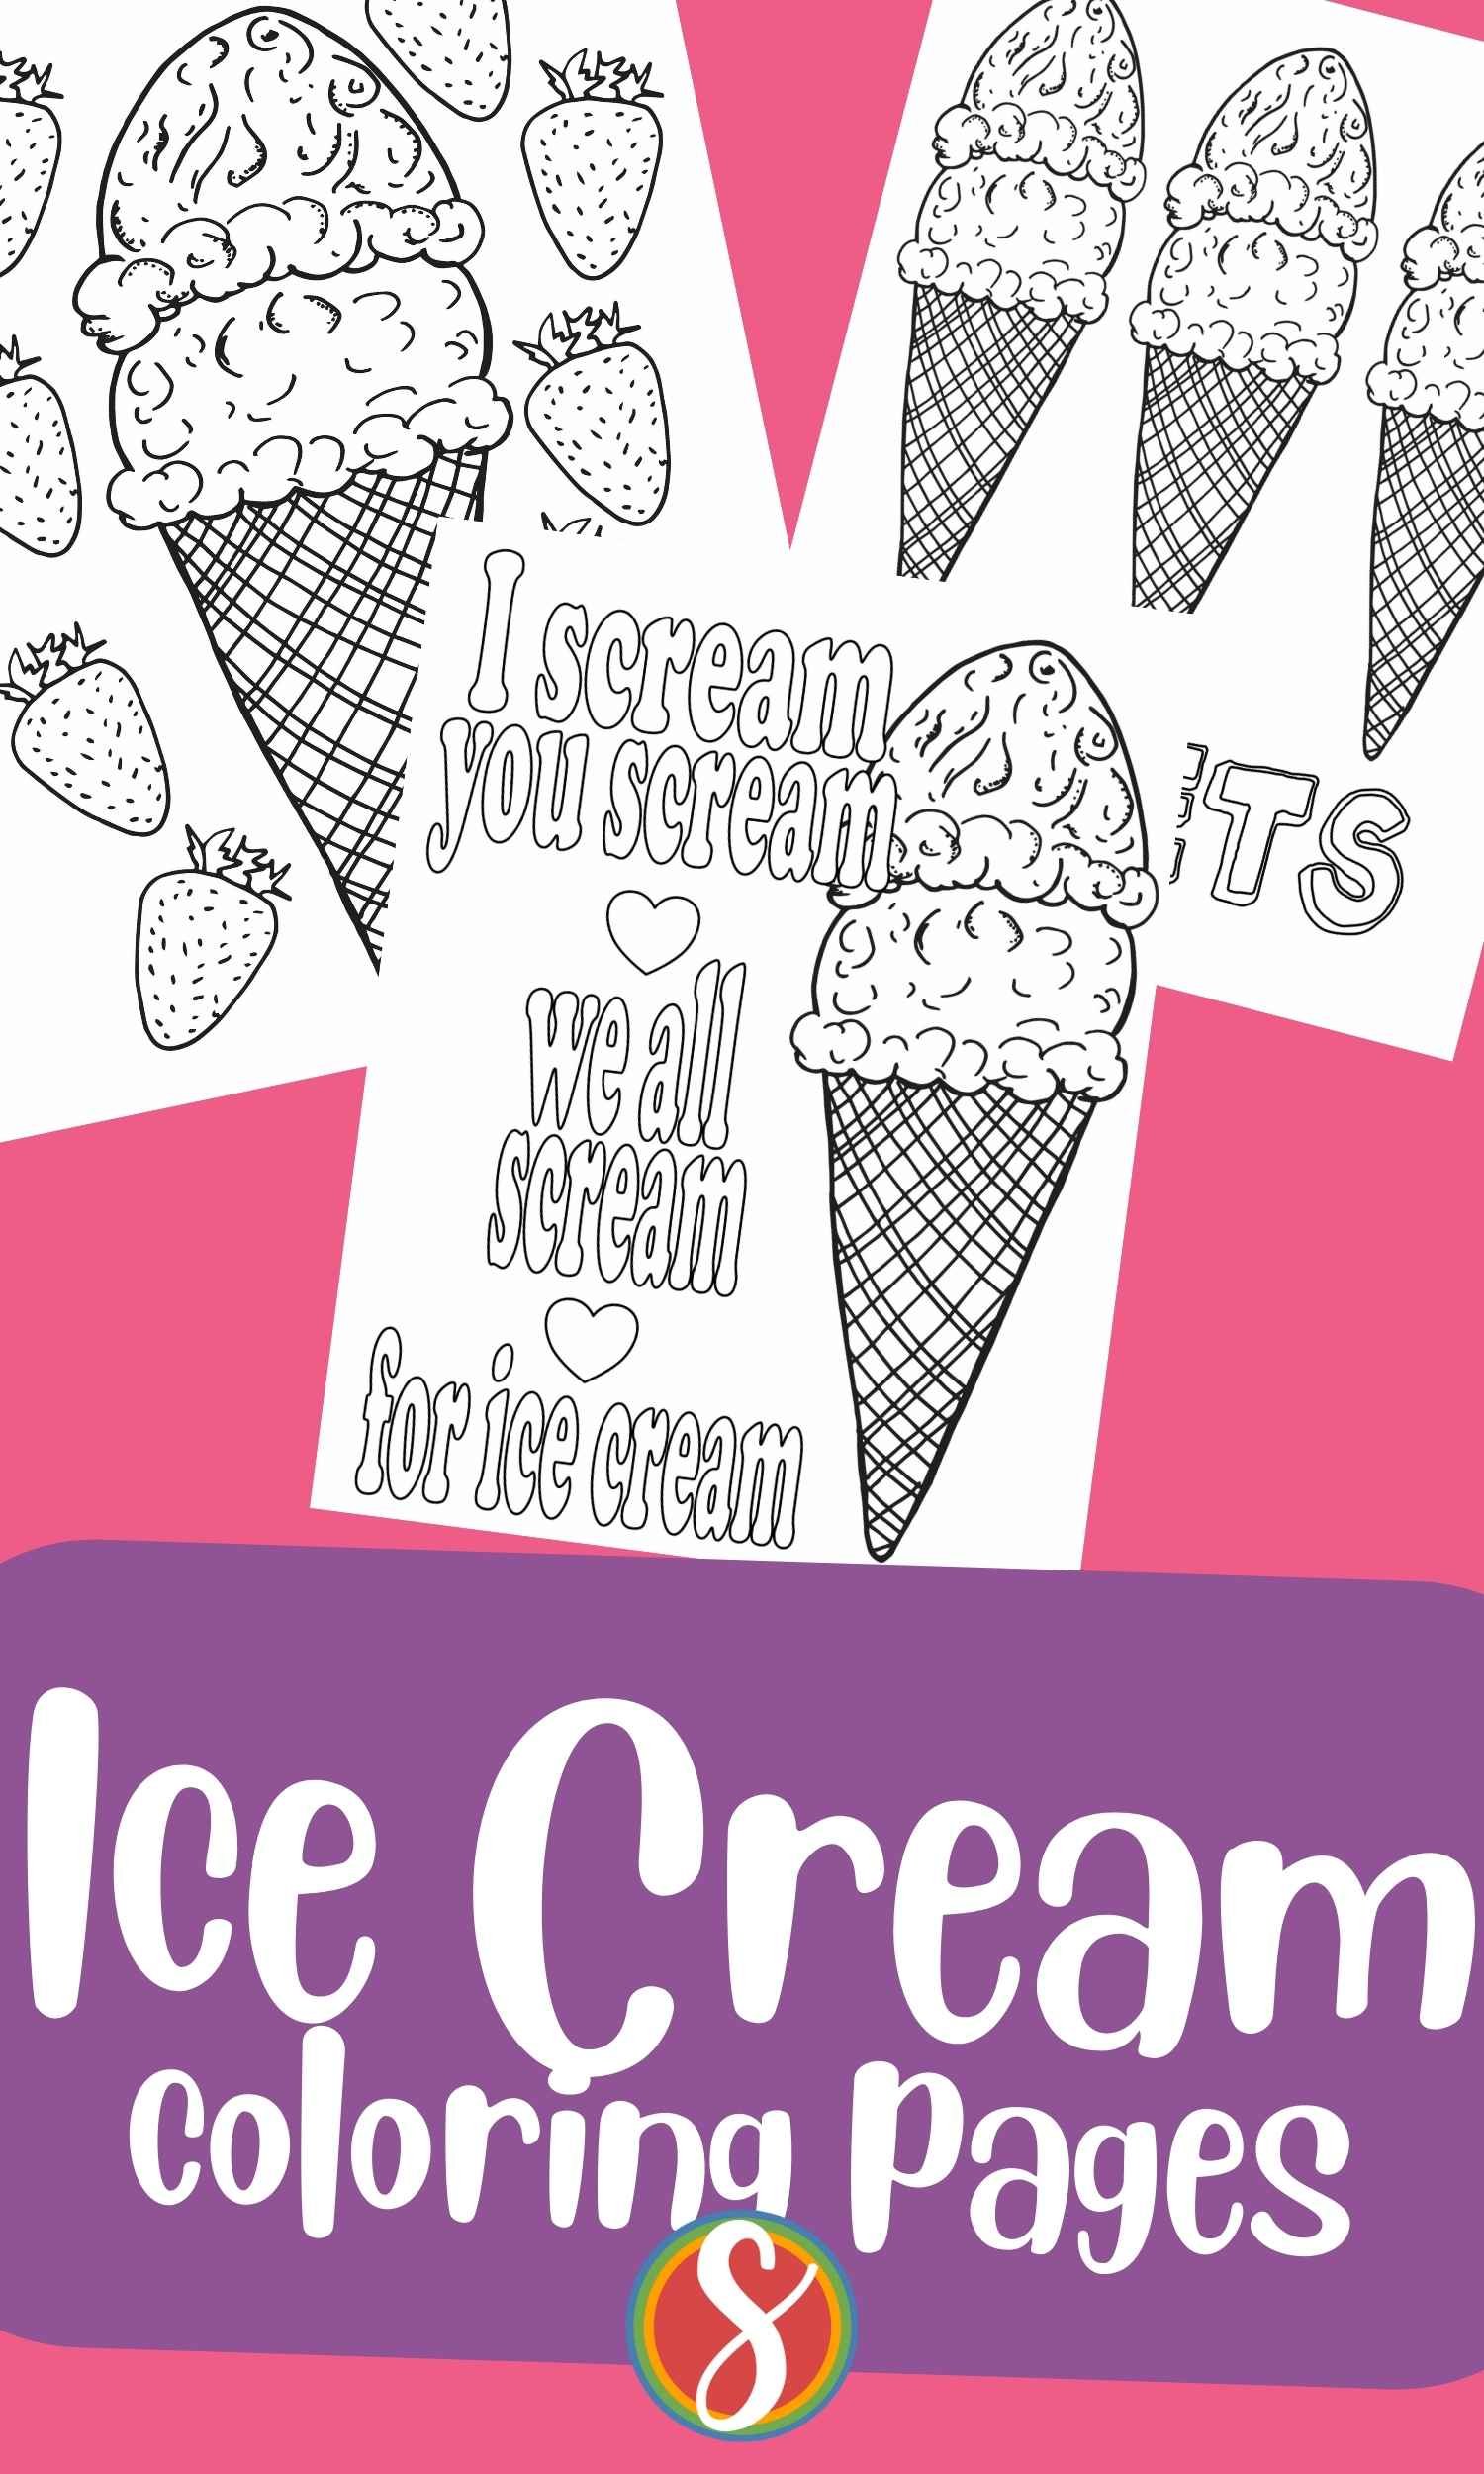 3 ice cream coloring pages on a pink background